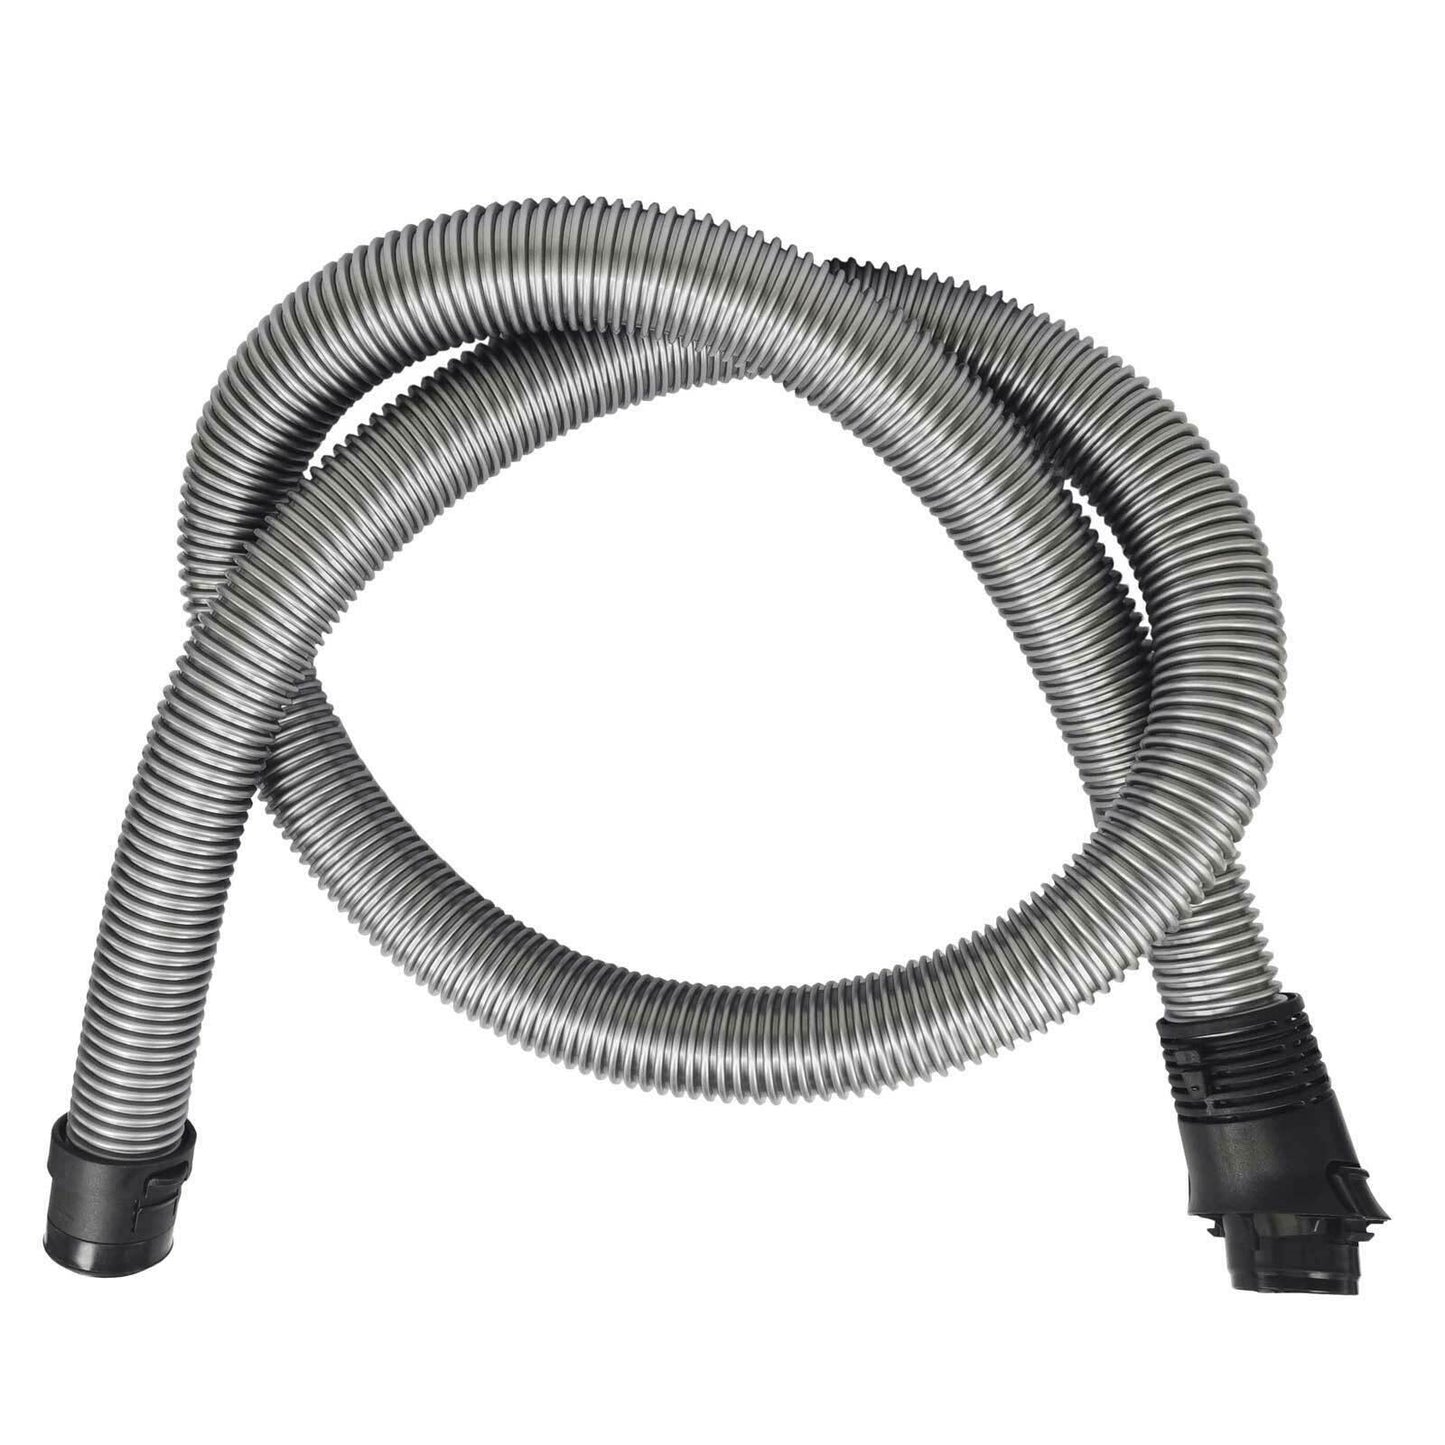 Vacuum Cleaner Pipe Hose 1.8M For Miele S5311 SBB S5211 S5360 S5310 S5210 Sparesbarn